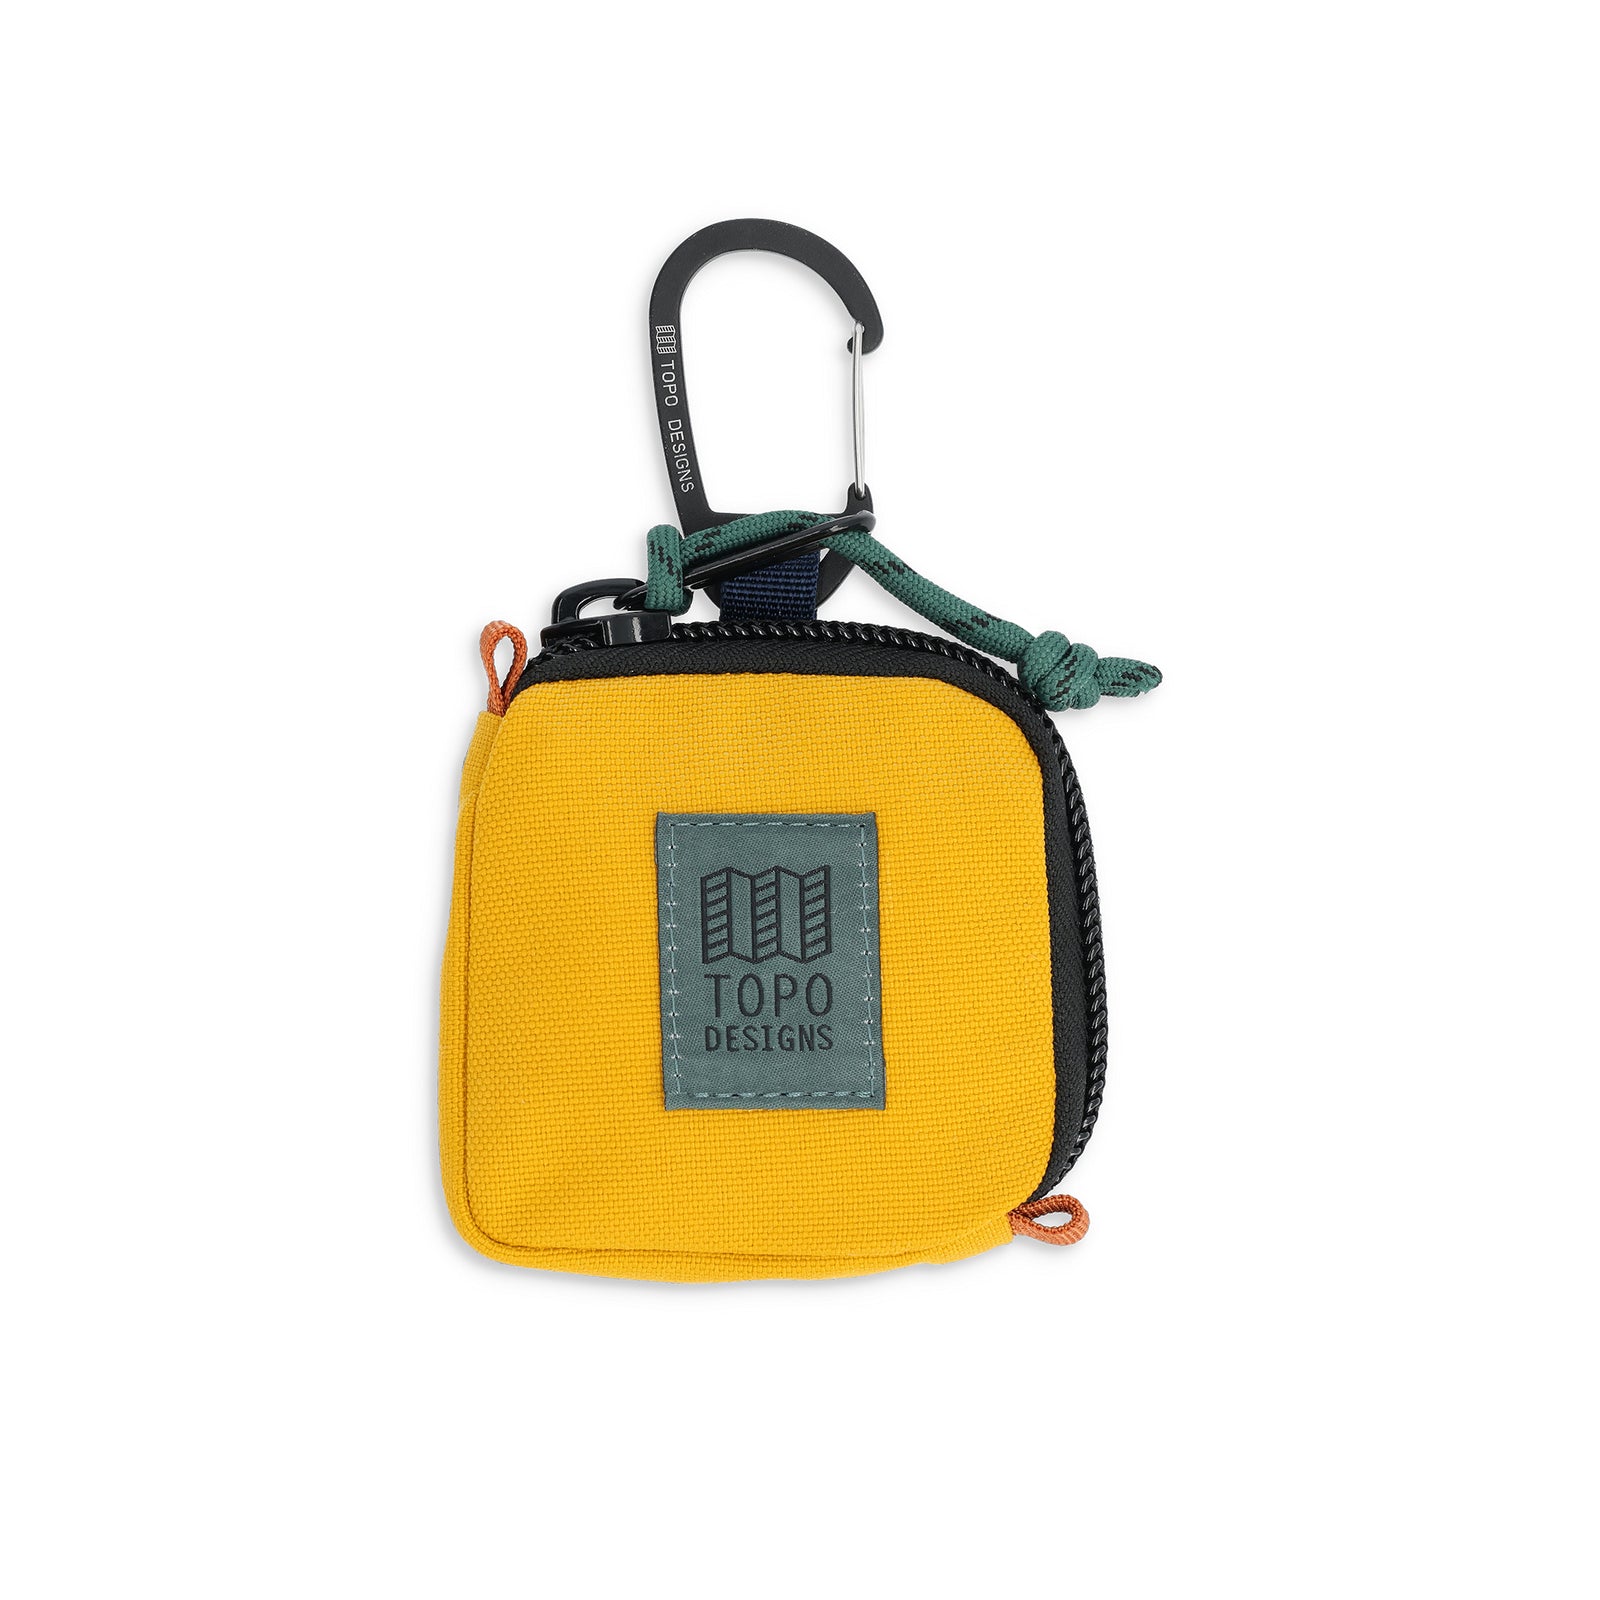 Front View of Topo Designs Square Bag in "Mustard"